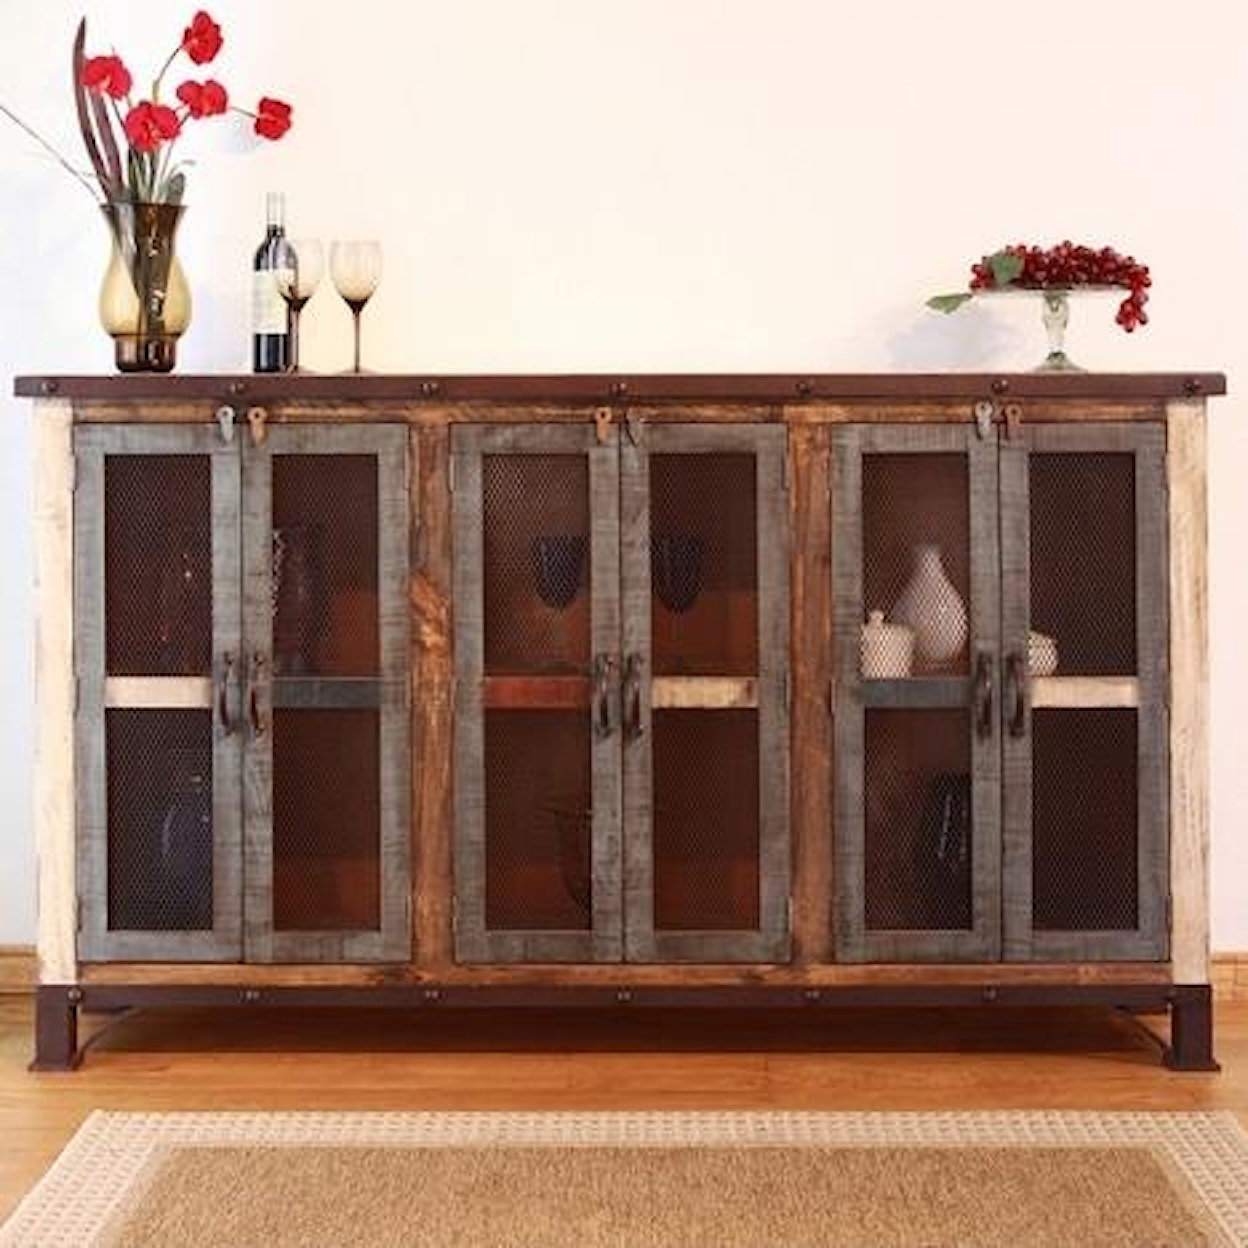 IFD International Furniture Direct 900 Antique Multicolor Console with 6 Iron Mesh Doors